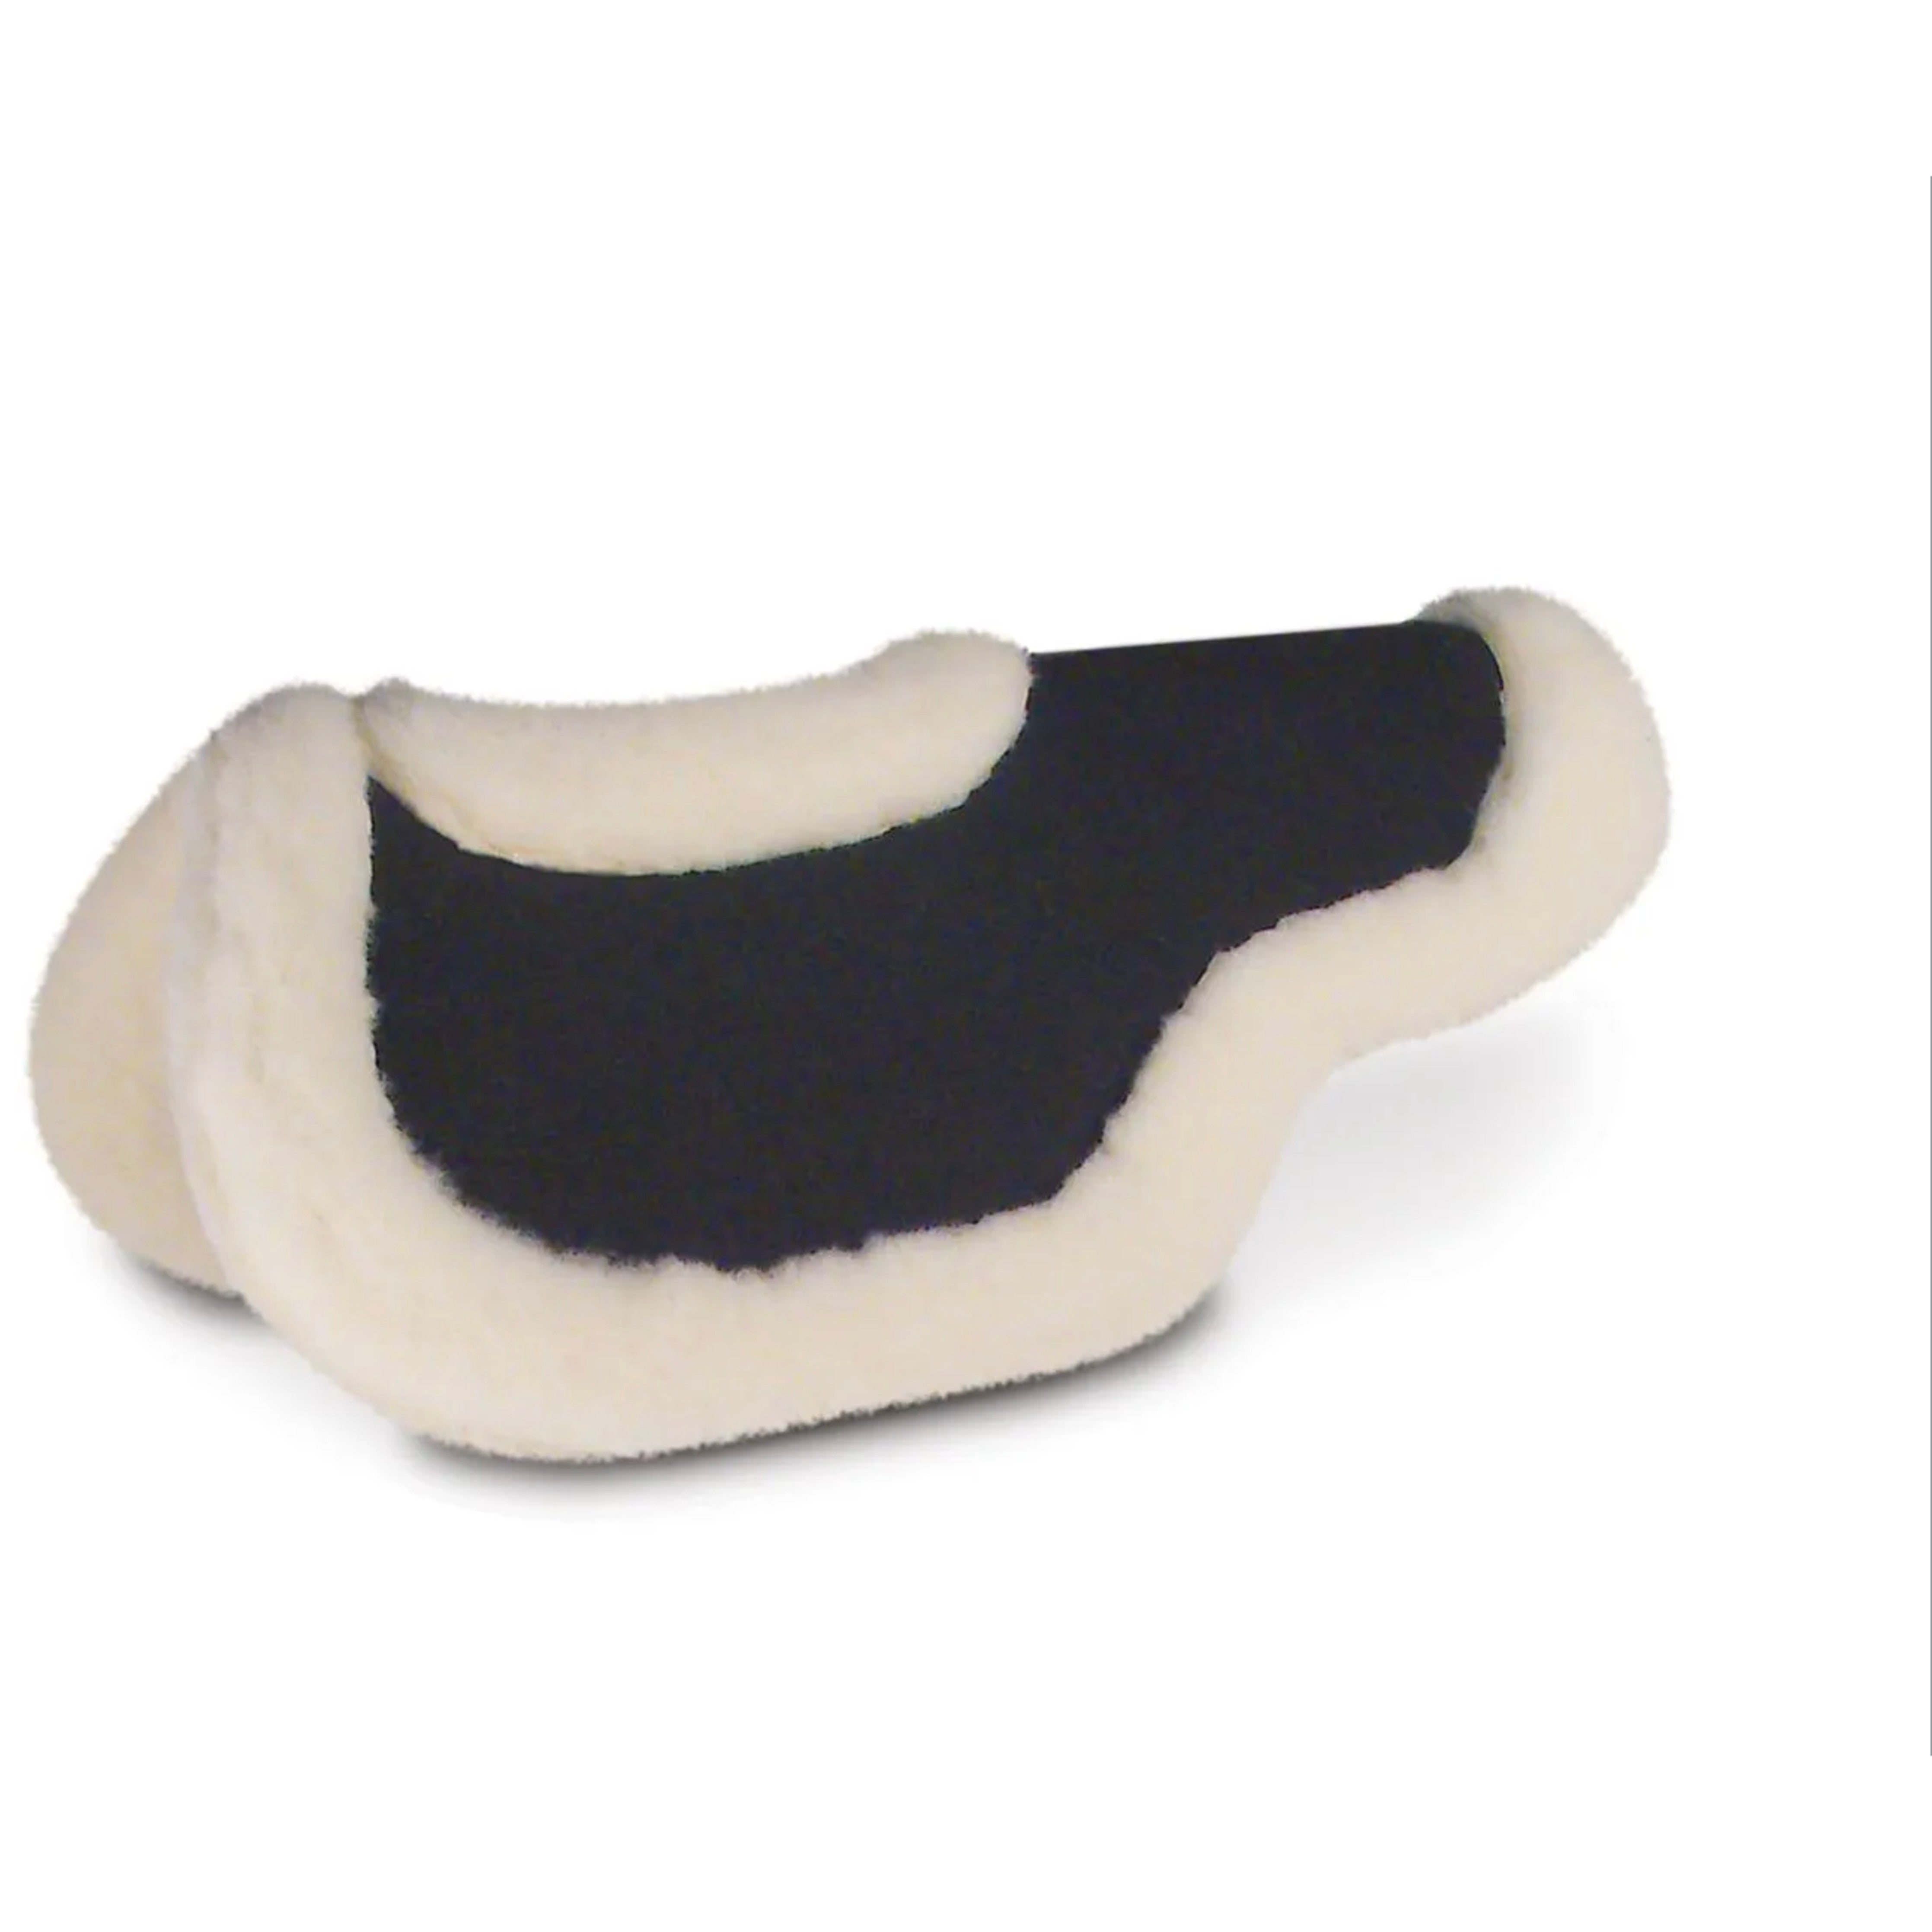 WoolBack Felt Wither Relief Half Pad - Natural/Black